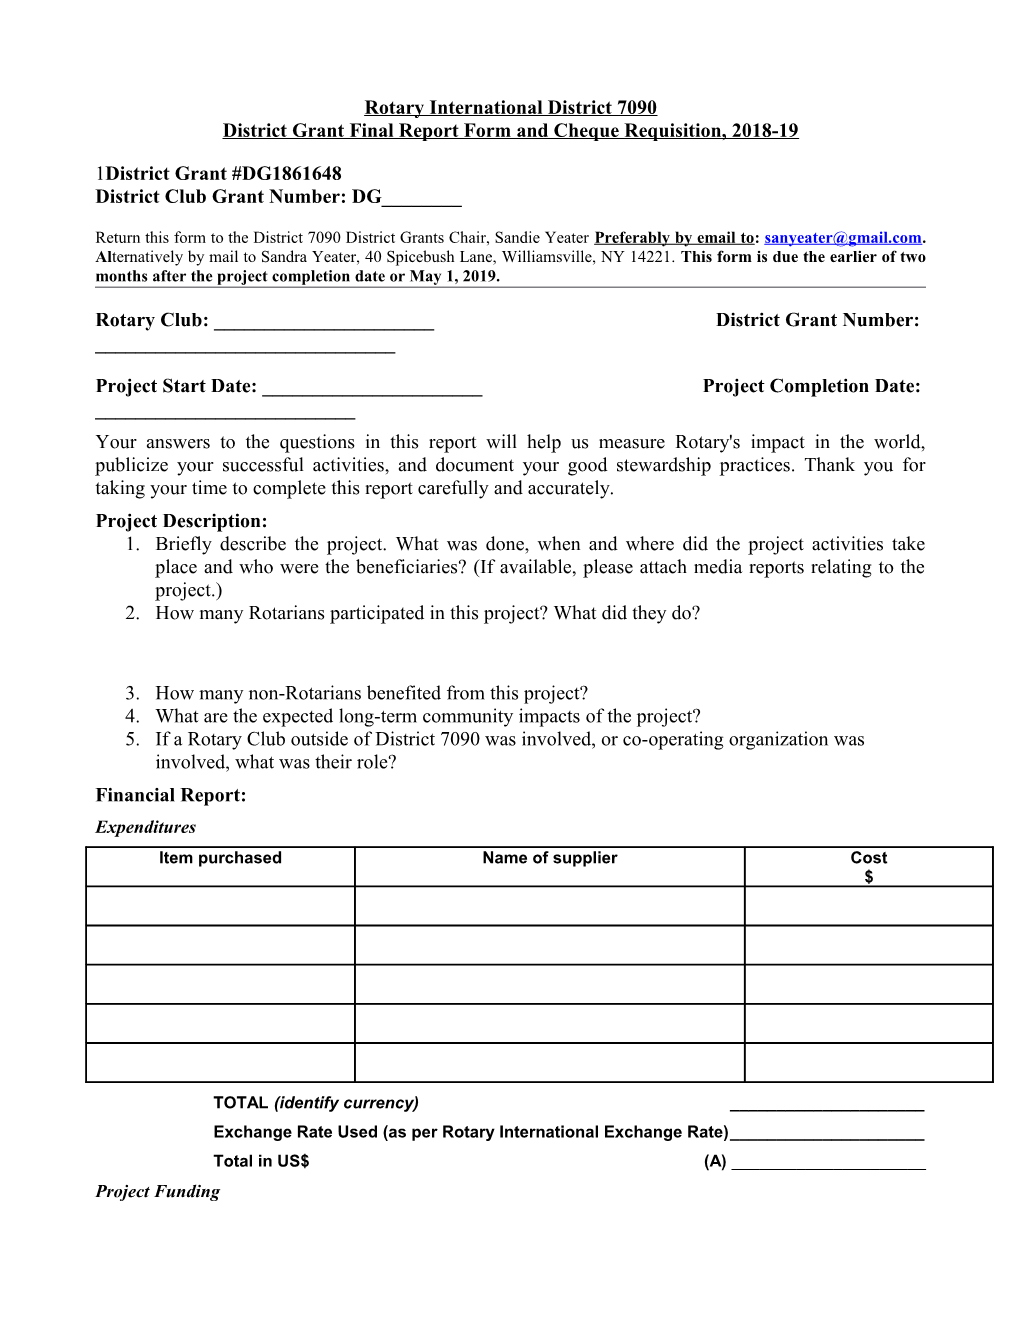 District Grant Final Report Form and Cheque Requisition, 2018-19